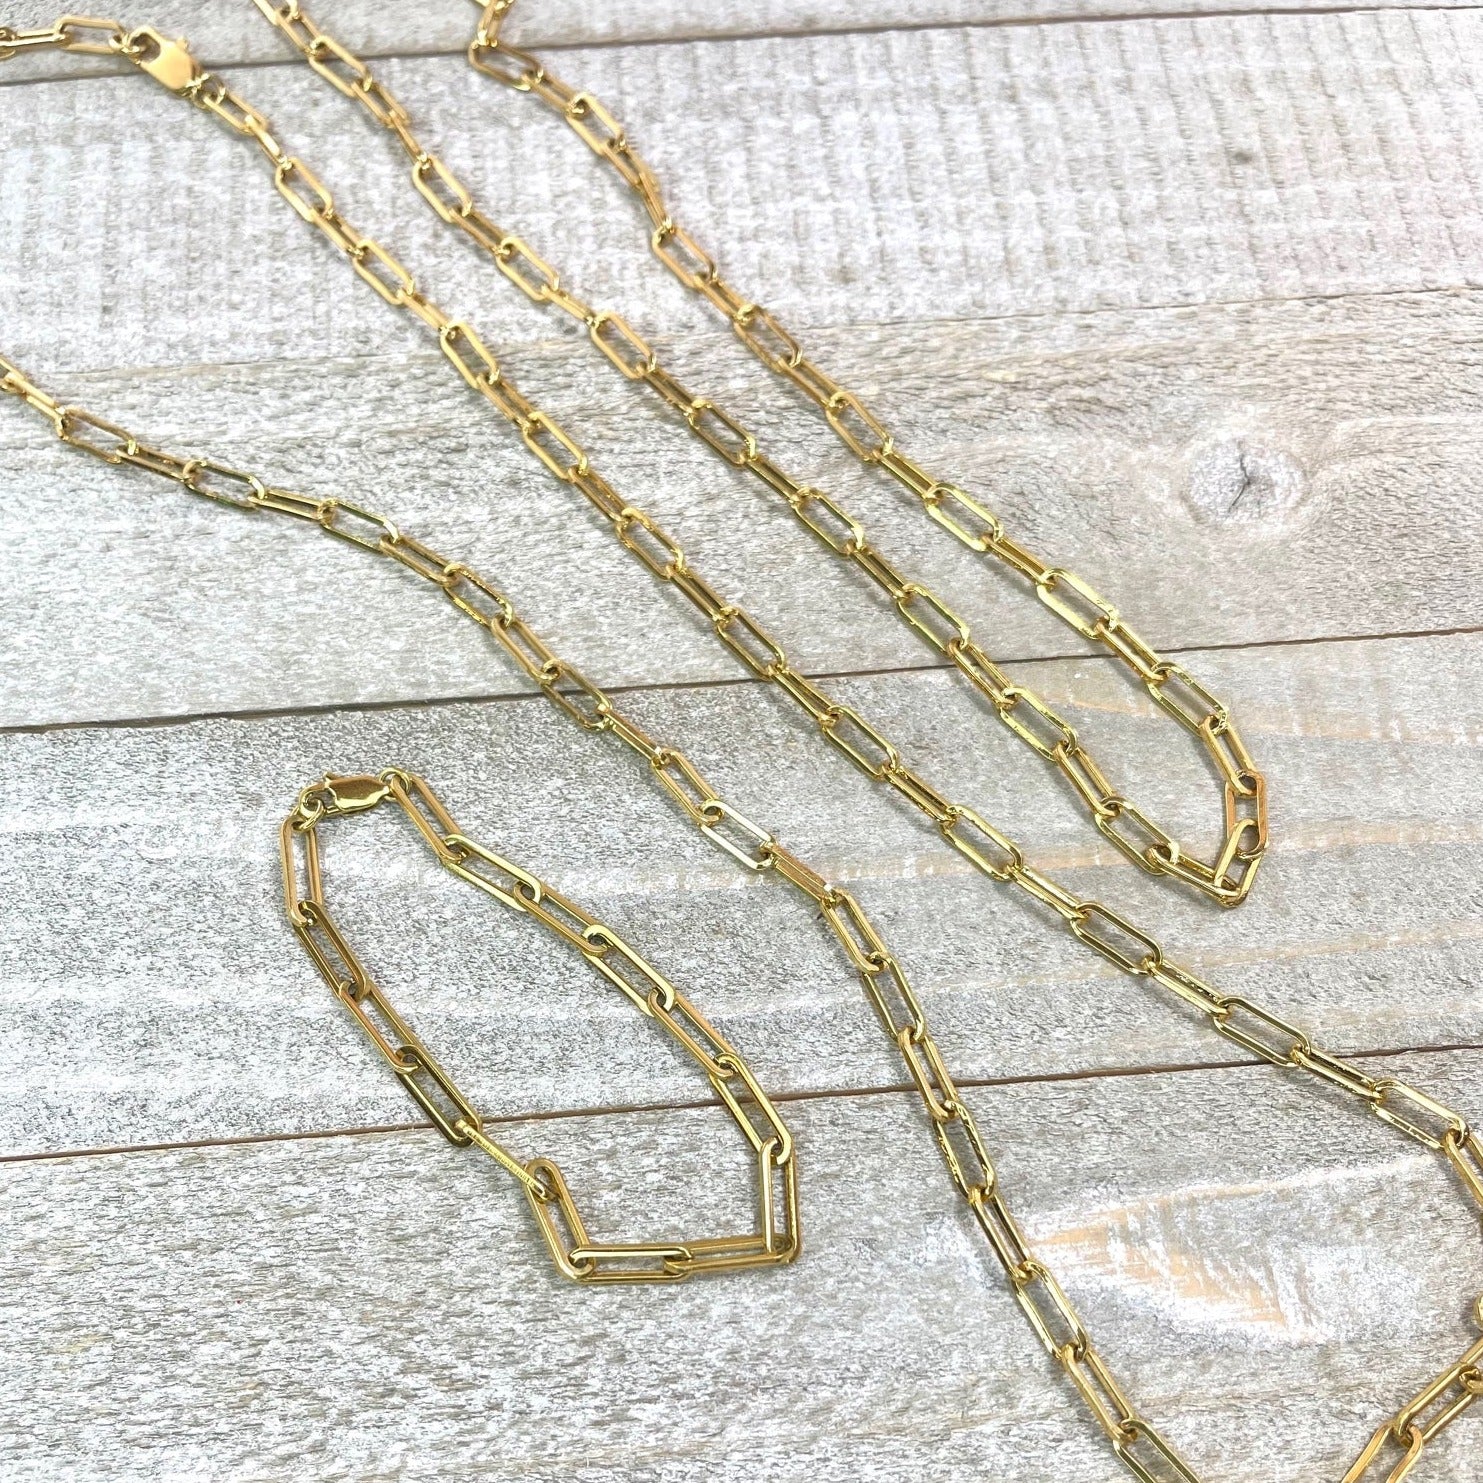 24" Gold Plated Paperclip Chain Link Necklace for Women - Stylish Layering Necklace